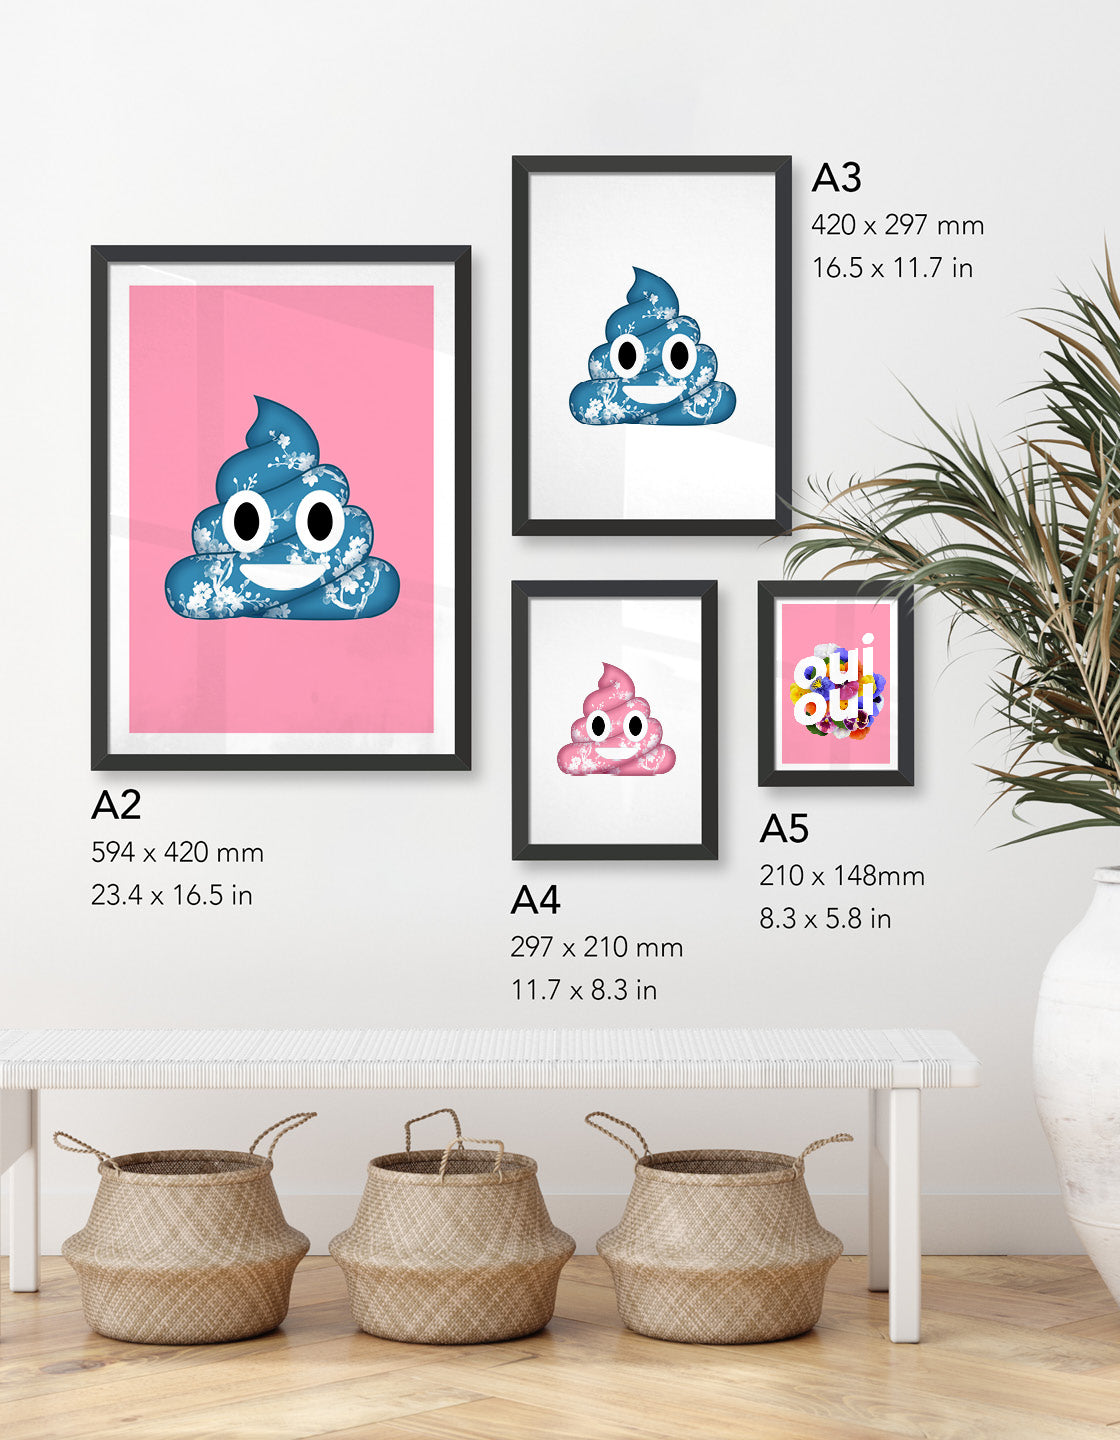 image depicting four different size prints available in the poo emoji collection; A5, A4, A3 and A2